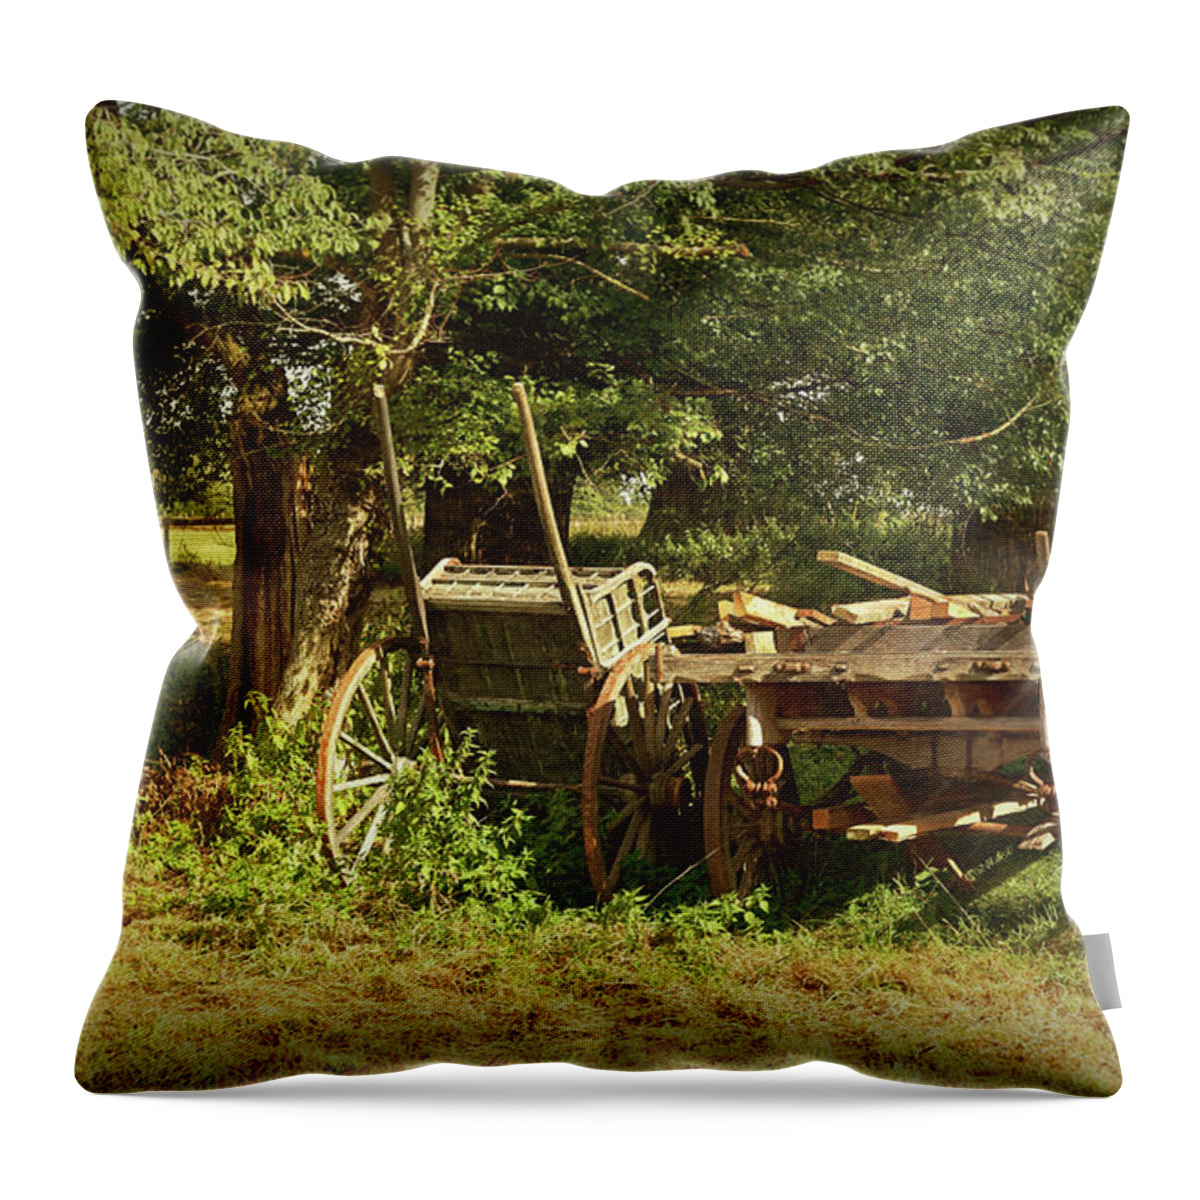 Carts Throw Pillow featuring the photograph The Farmers Carts by Ian Merton